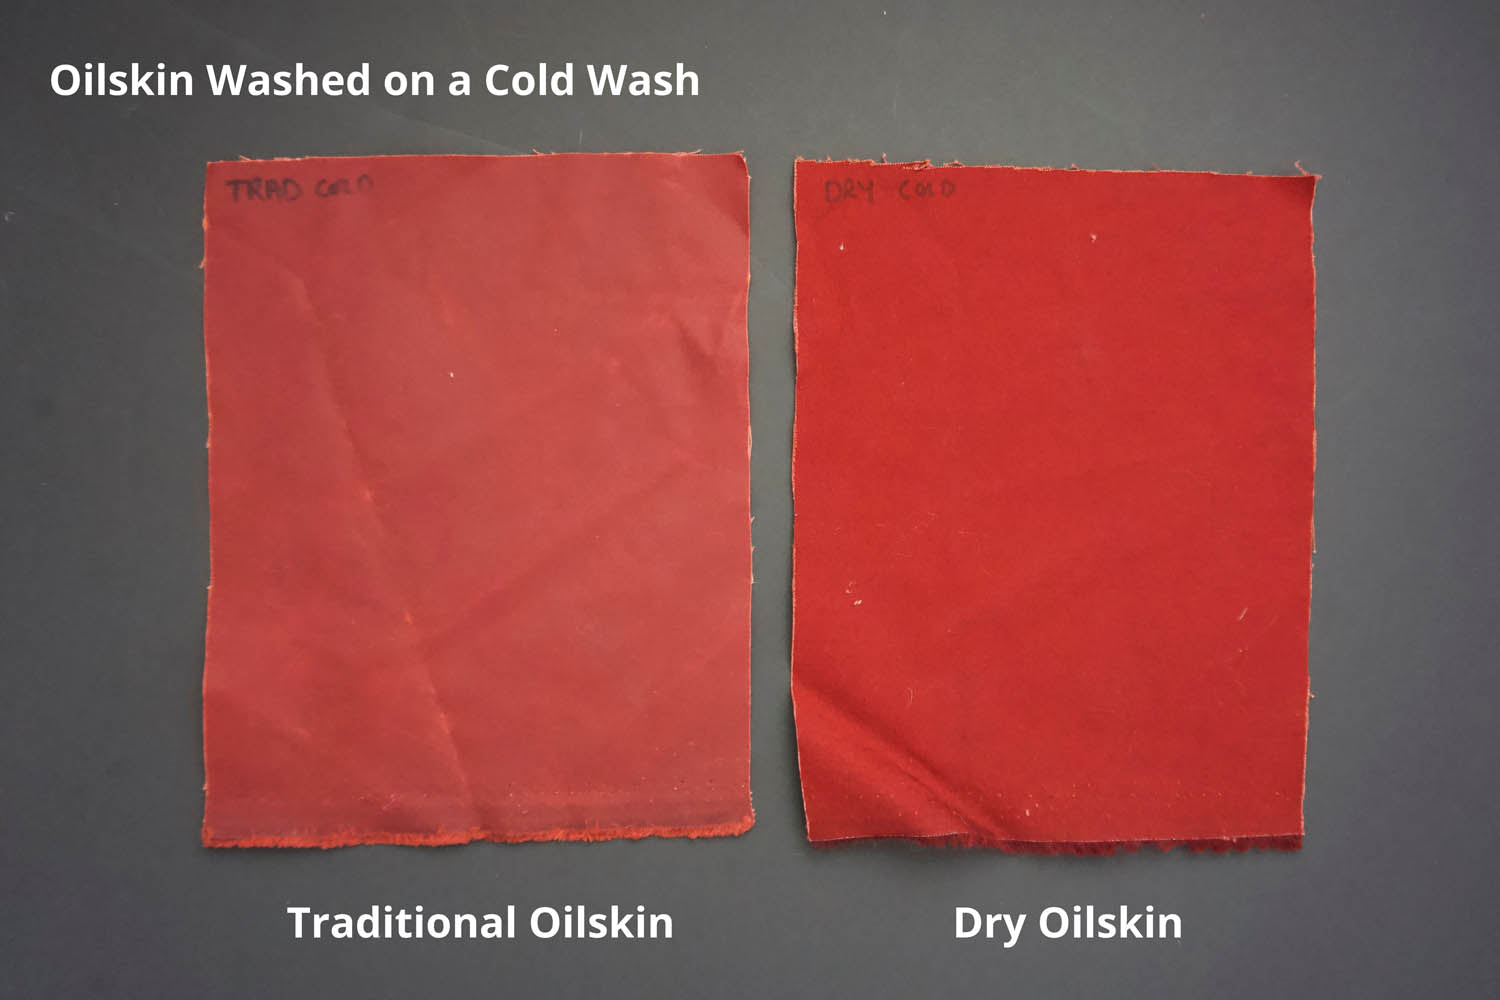 Two pieces of oilskin side by side showing the difference to the oilskin after it has been washed on a cold wash